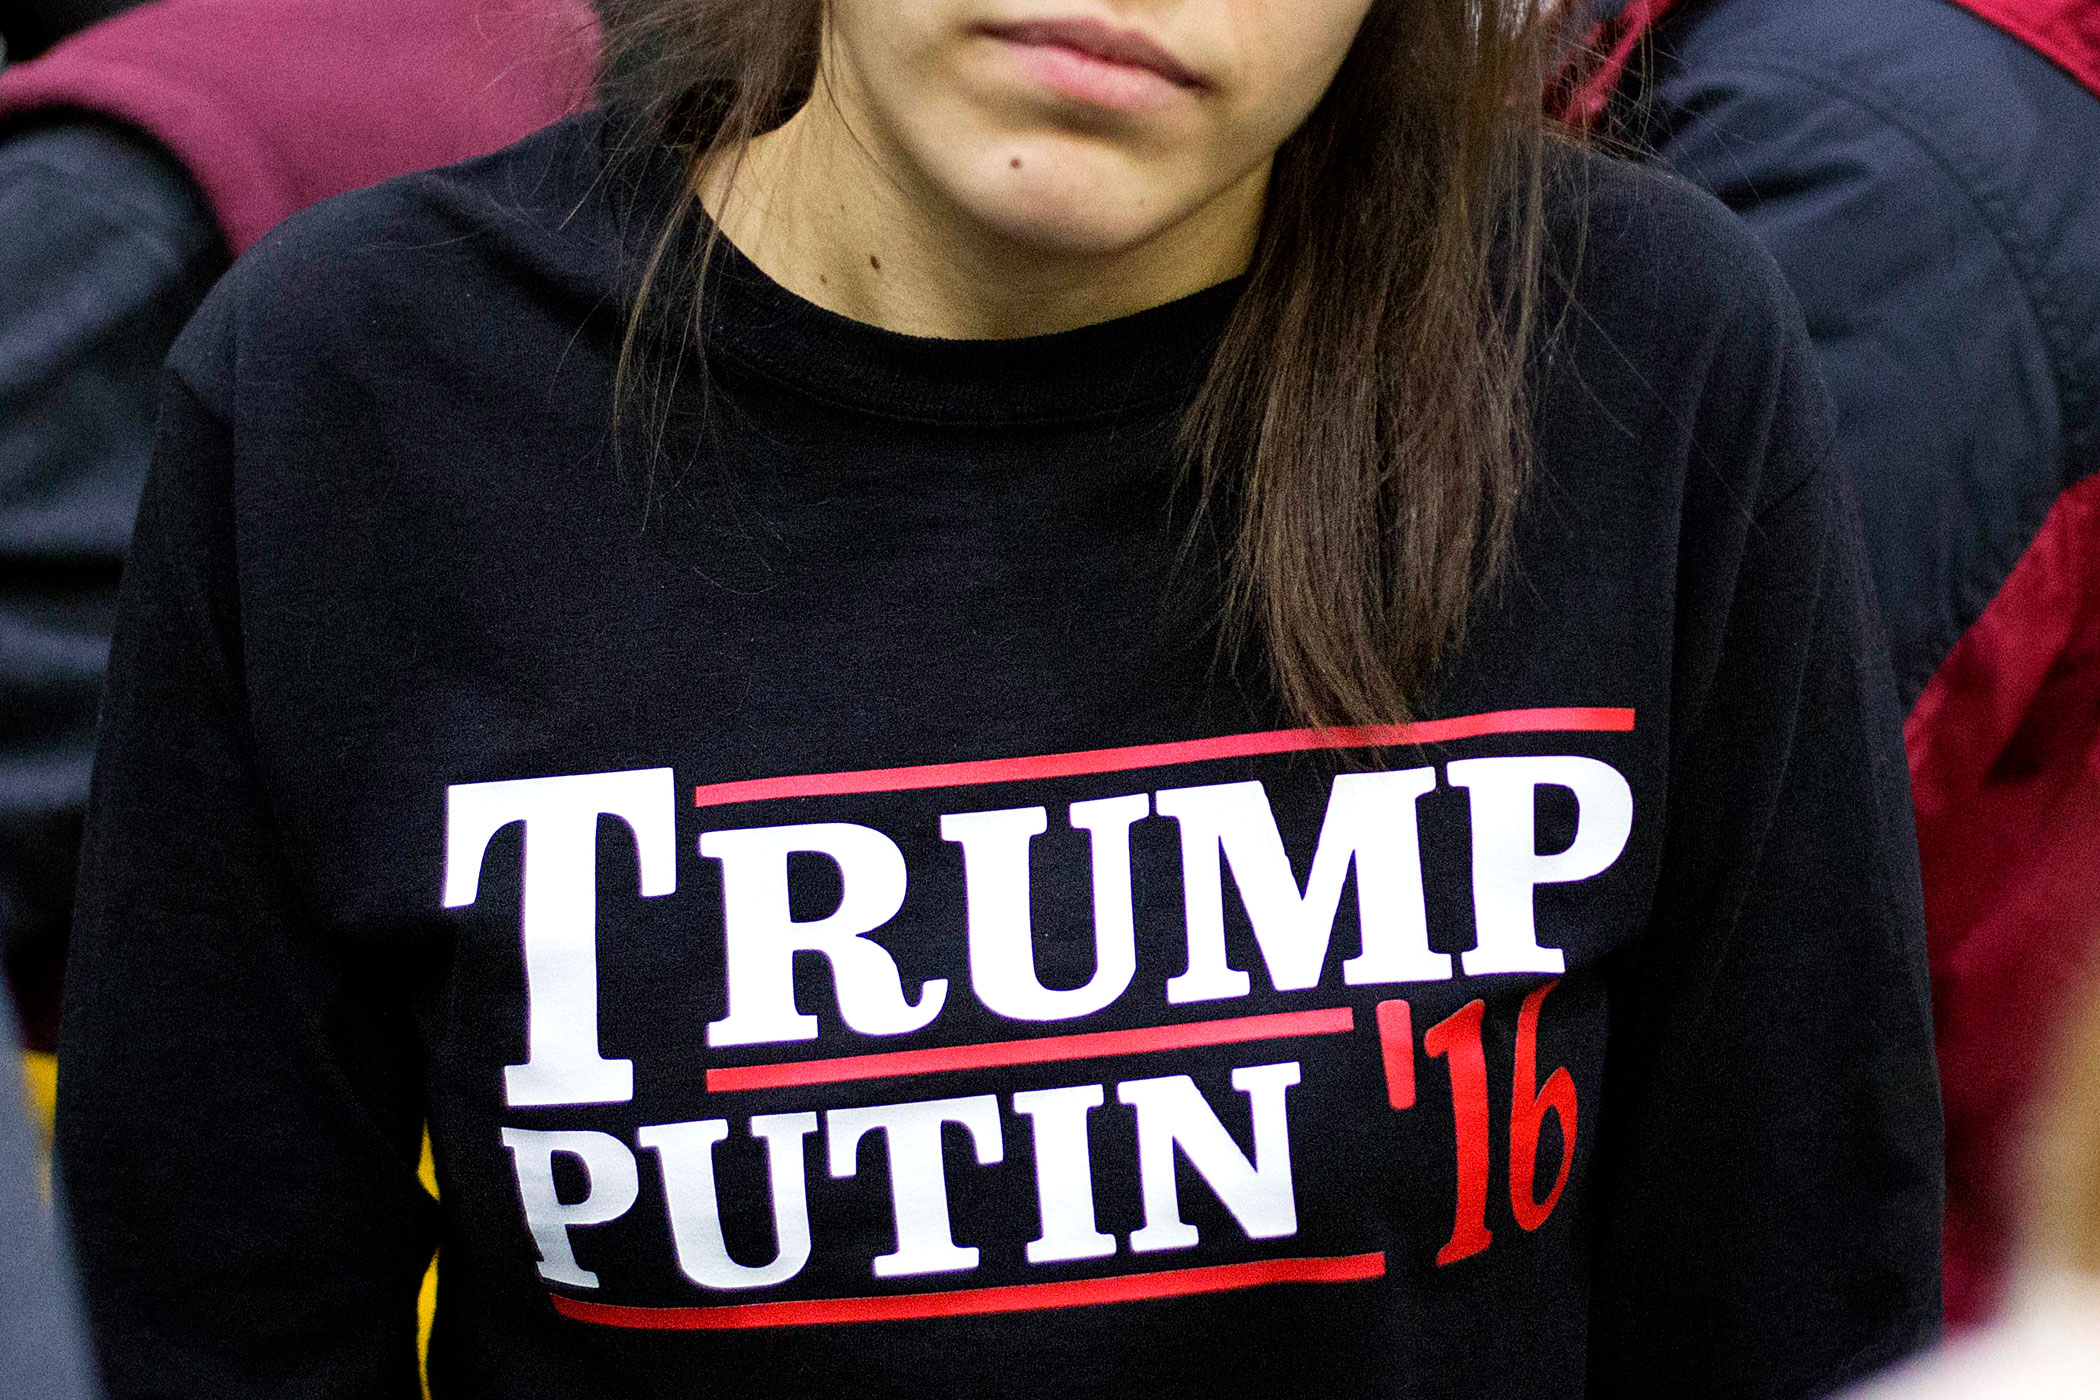 A woman wears a shirt reading 'Trump Putin '16'  at a campaign event for Donald Trump at Plymouth State University on Feb. 7 in Plymouth, N.H.